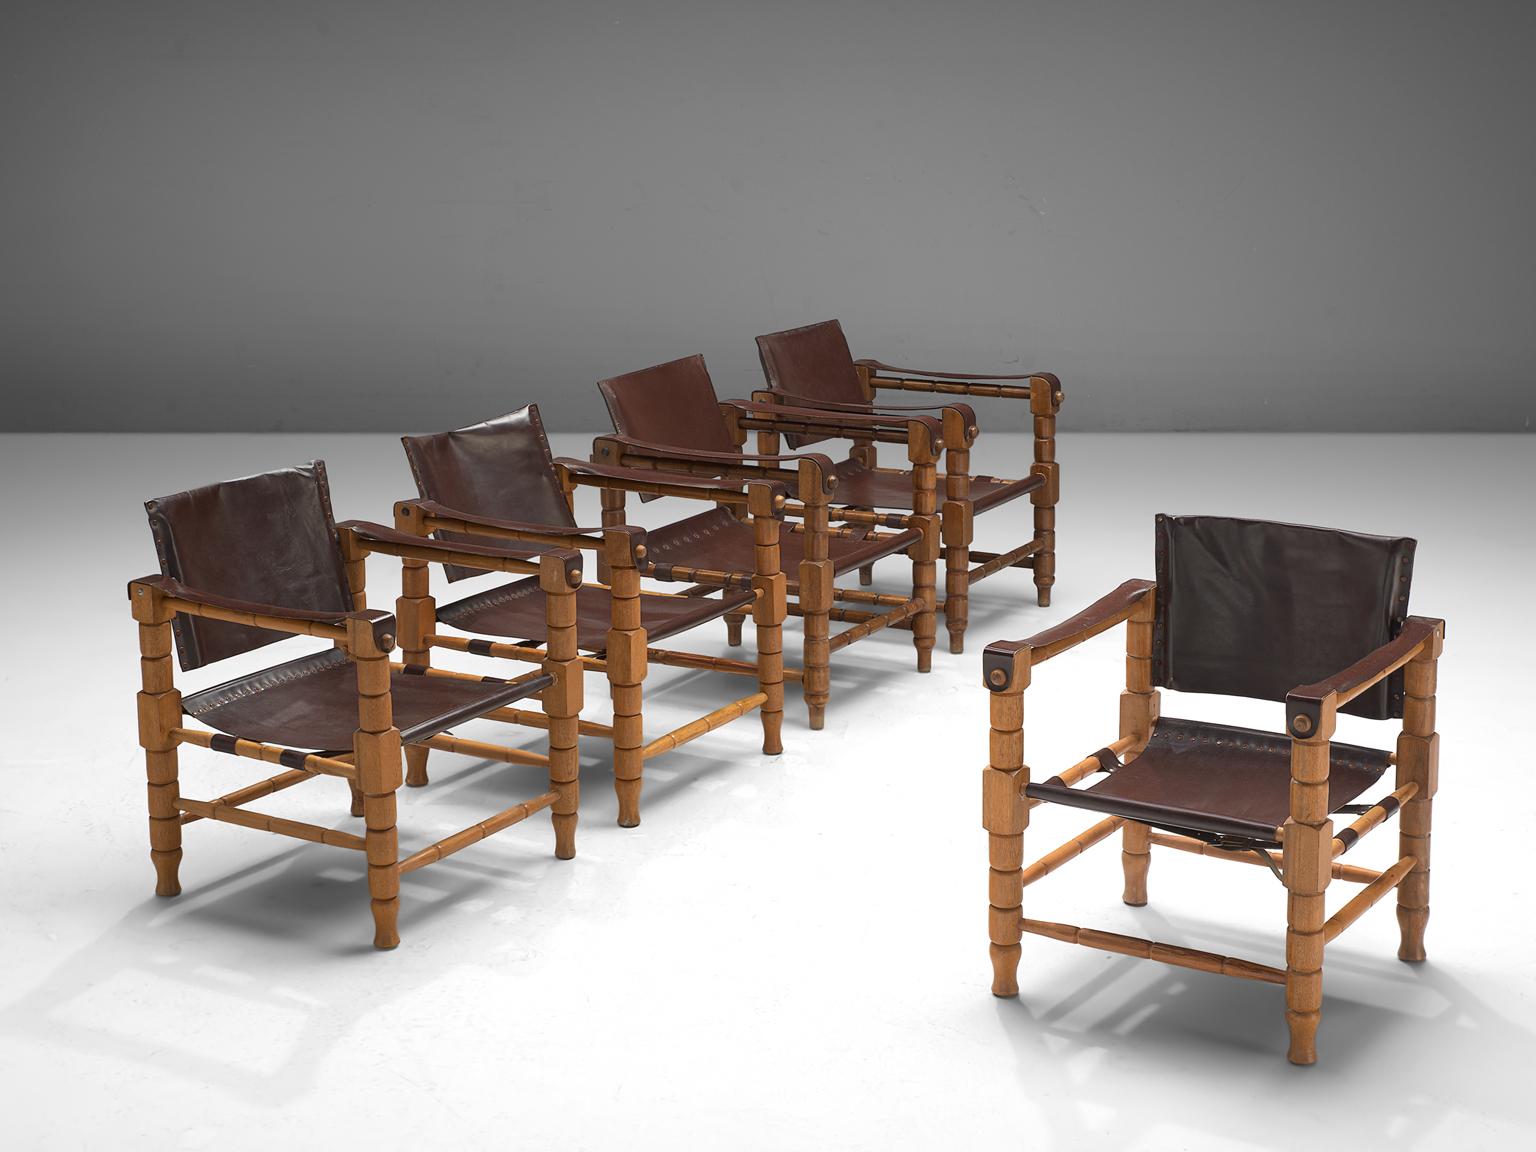 Leather Set of Three Safari Chairs with Sculptural Wooden Frames